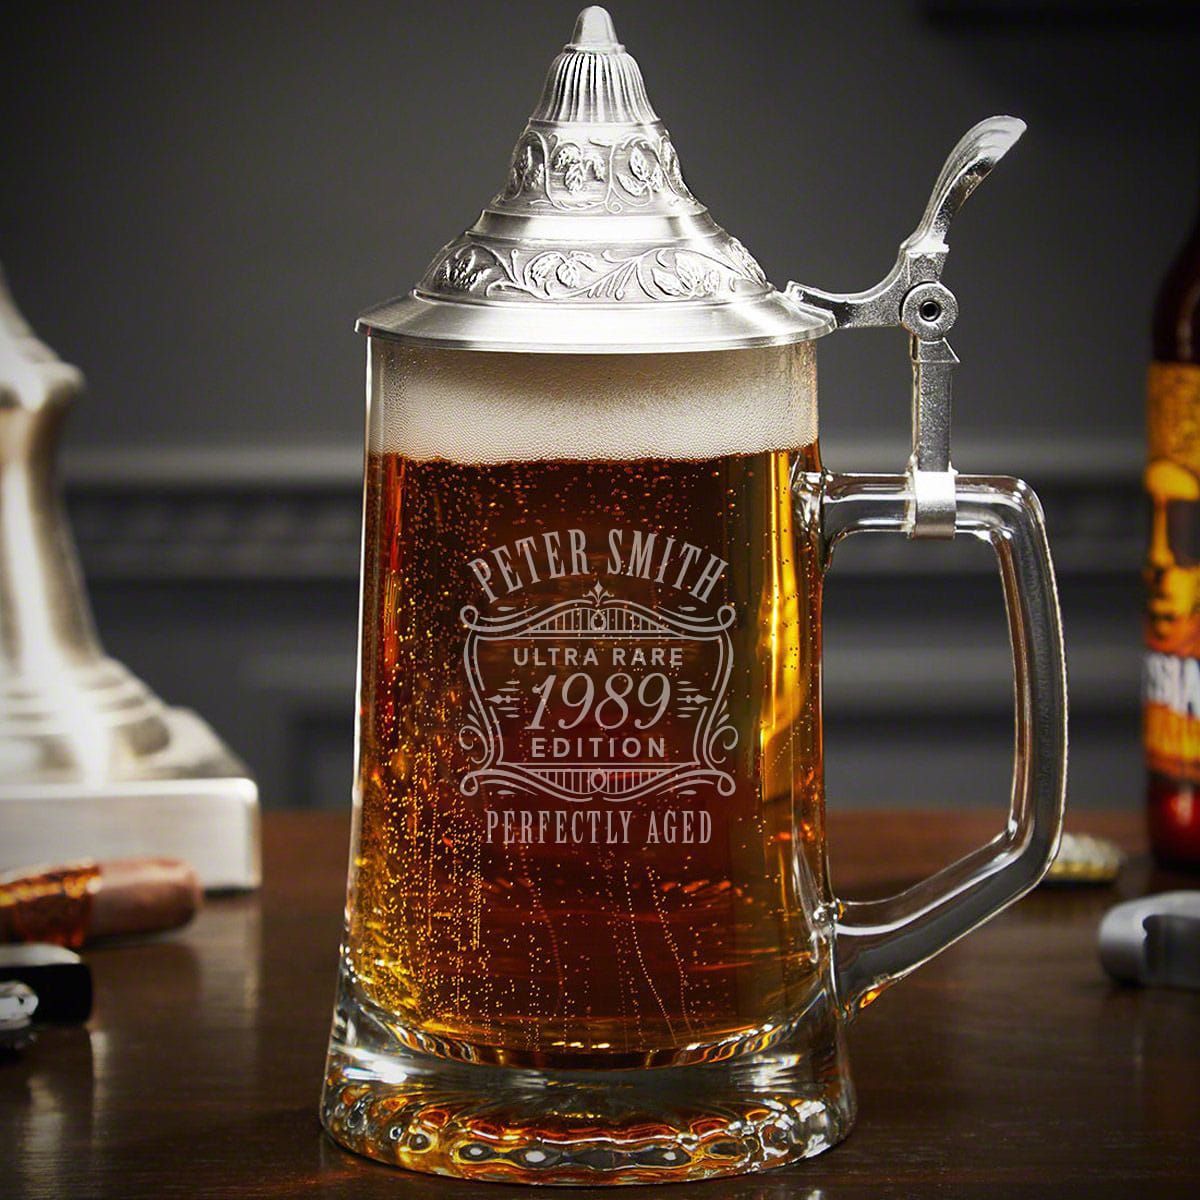 https://images.homewetbar.com/media/catalog/product/g/e/german-beer-stein-with-conical-lid-ultra-rare.jpg?store=default&image-type=image